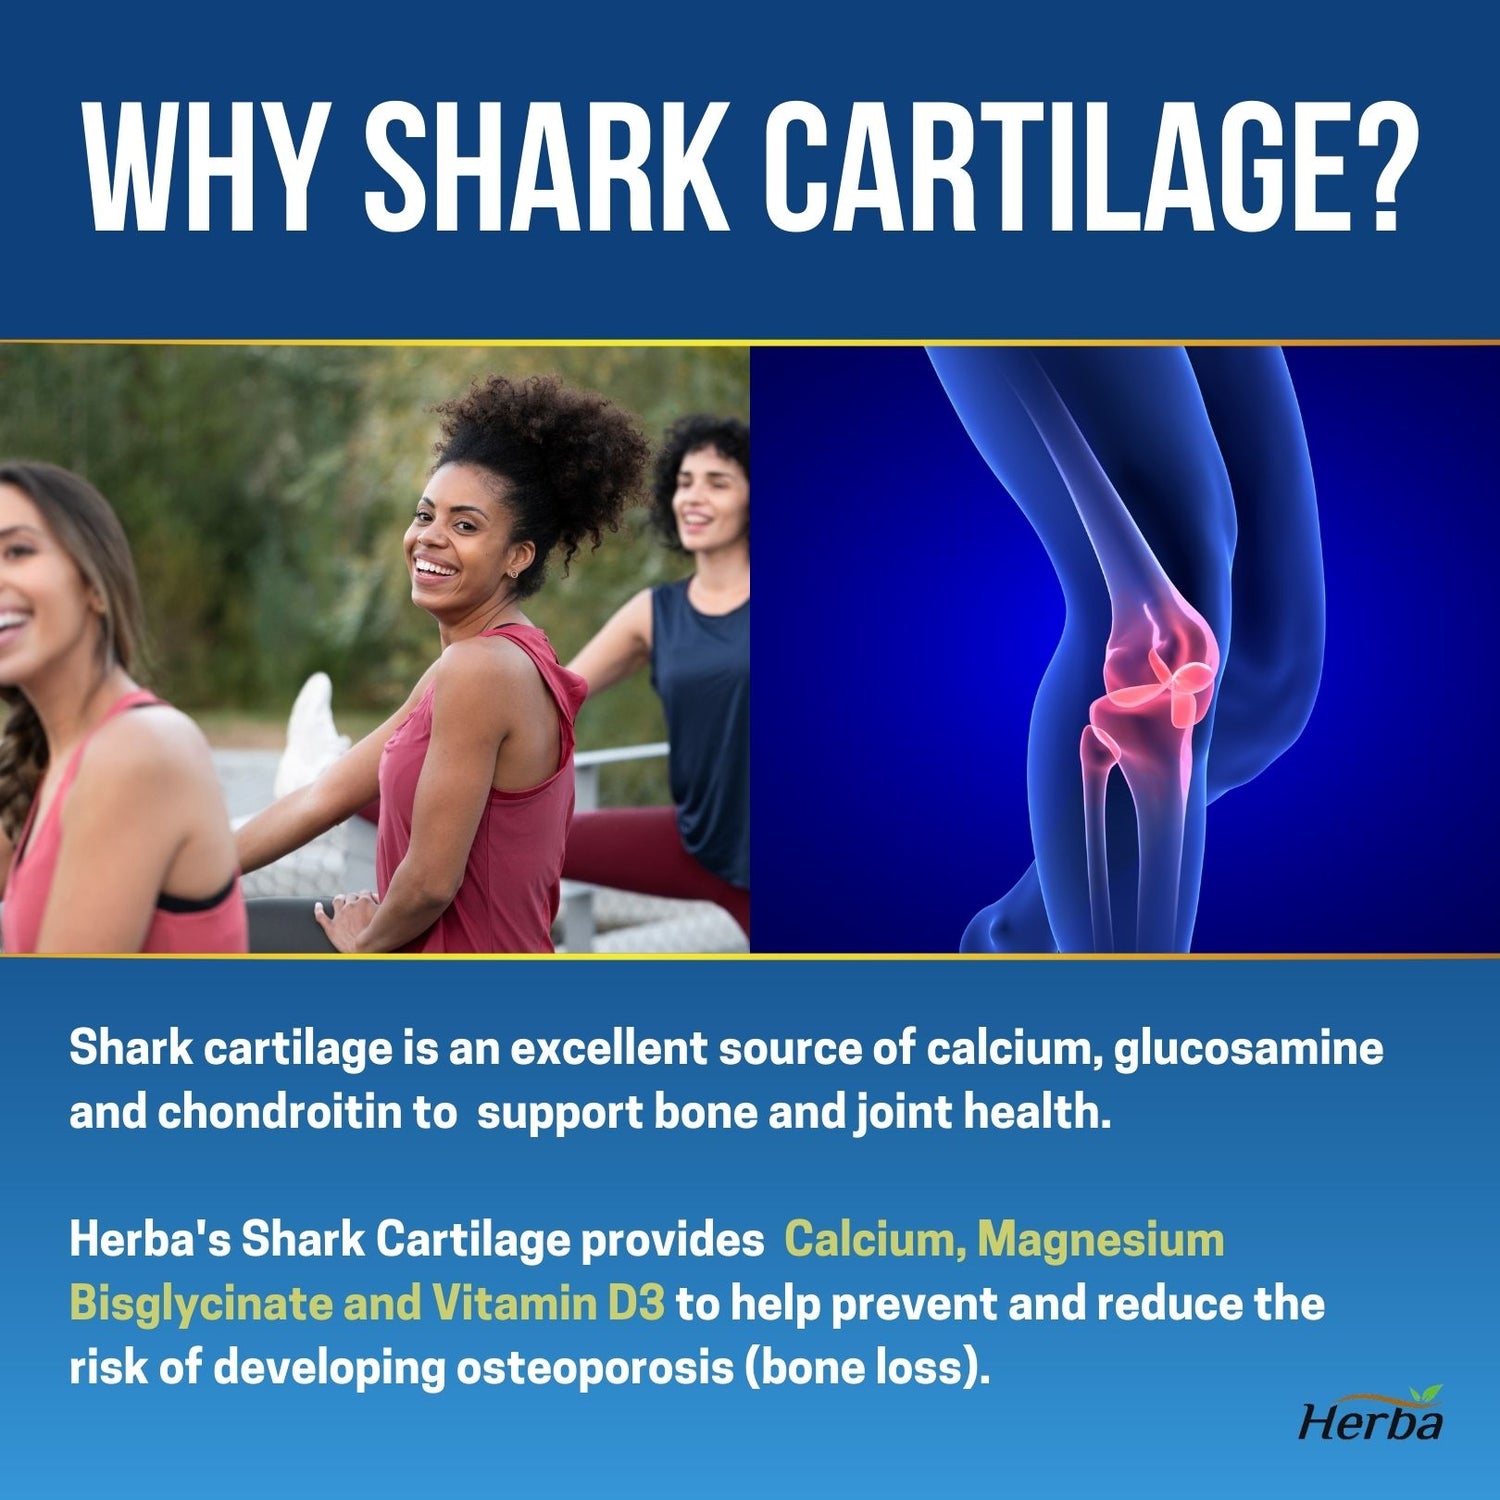 buy shark cartilage made in Canada